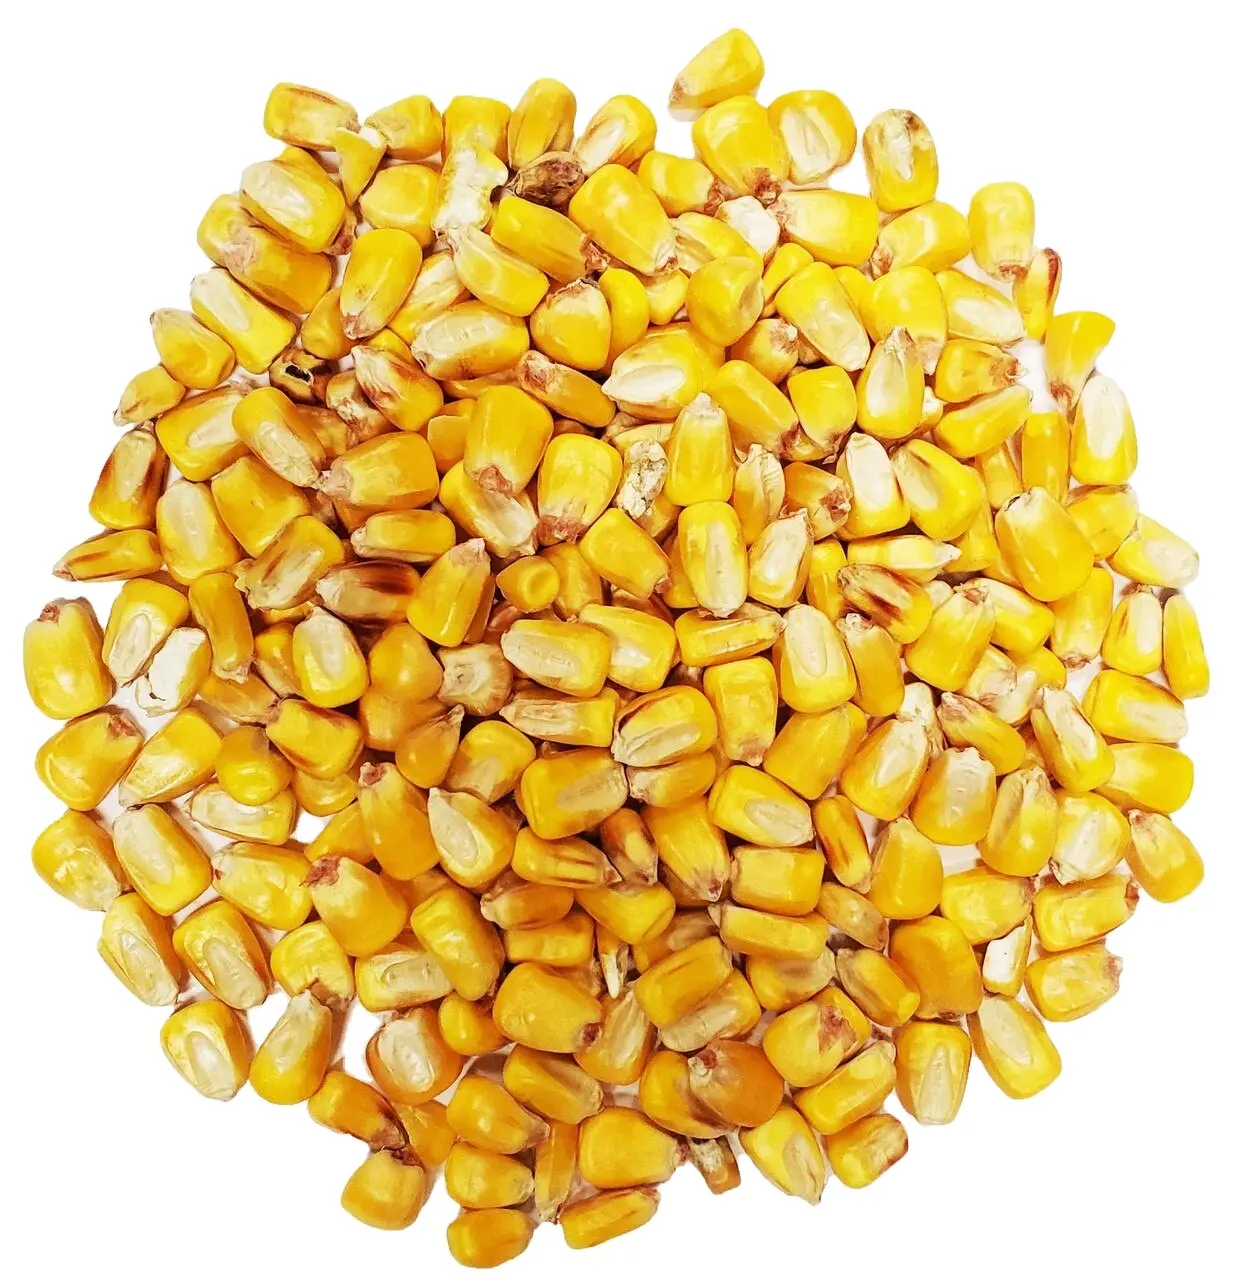 Top quality Dried Yellow Corn For Animal Feed ready for sale from India